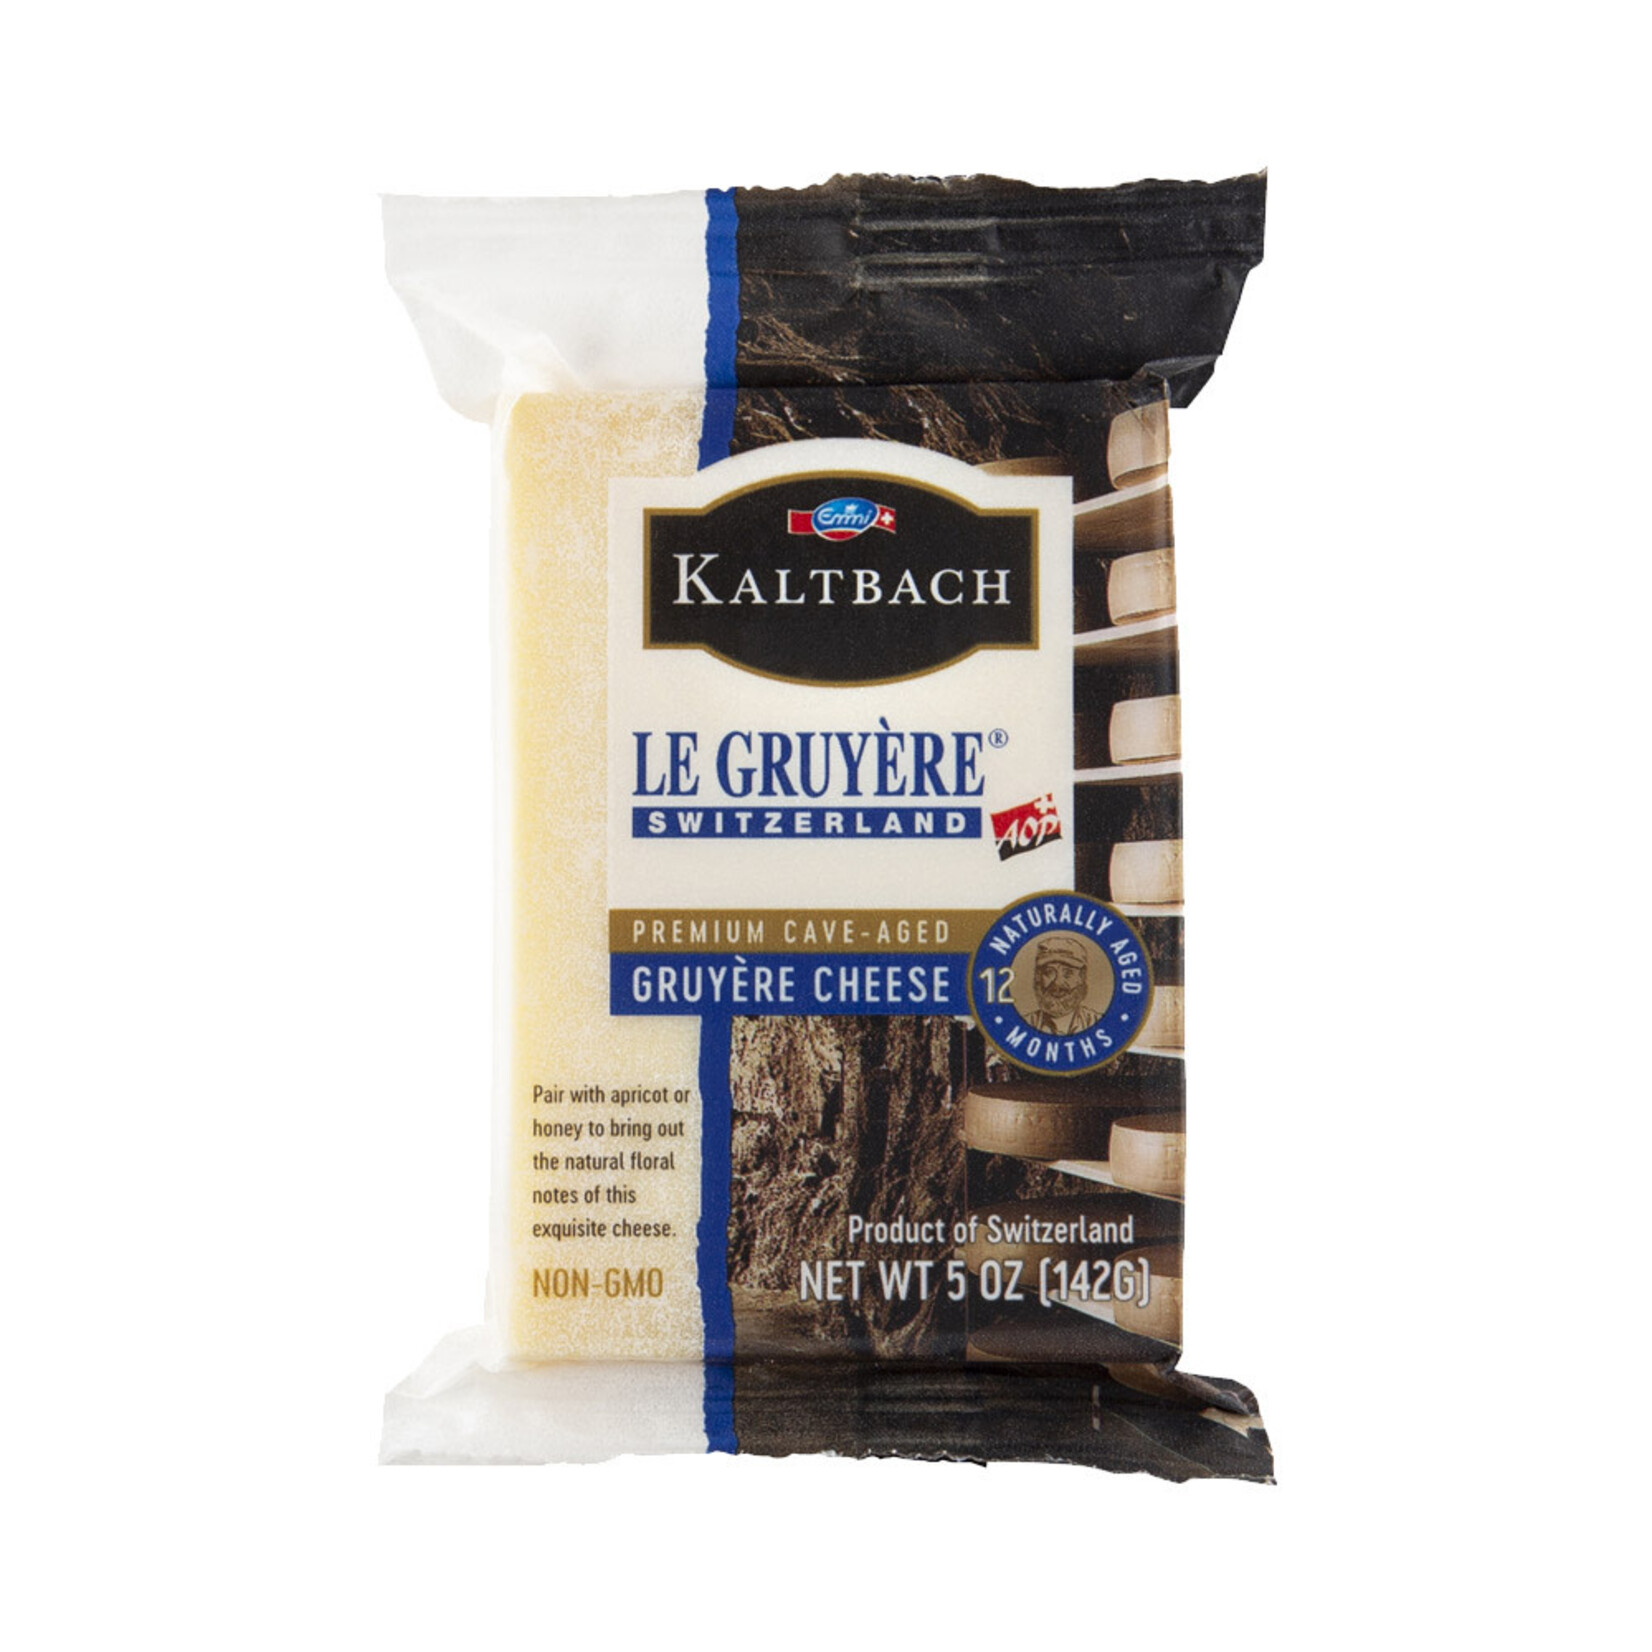 Emmi Kaltbach Le Gruyere-Cuts 5 ounce package Premium Cave-Aged Cheese Switzerland